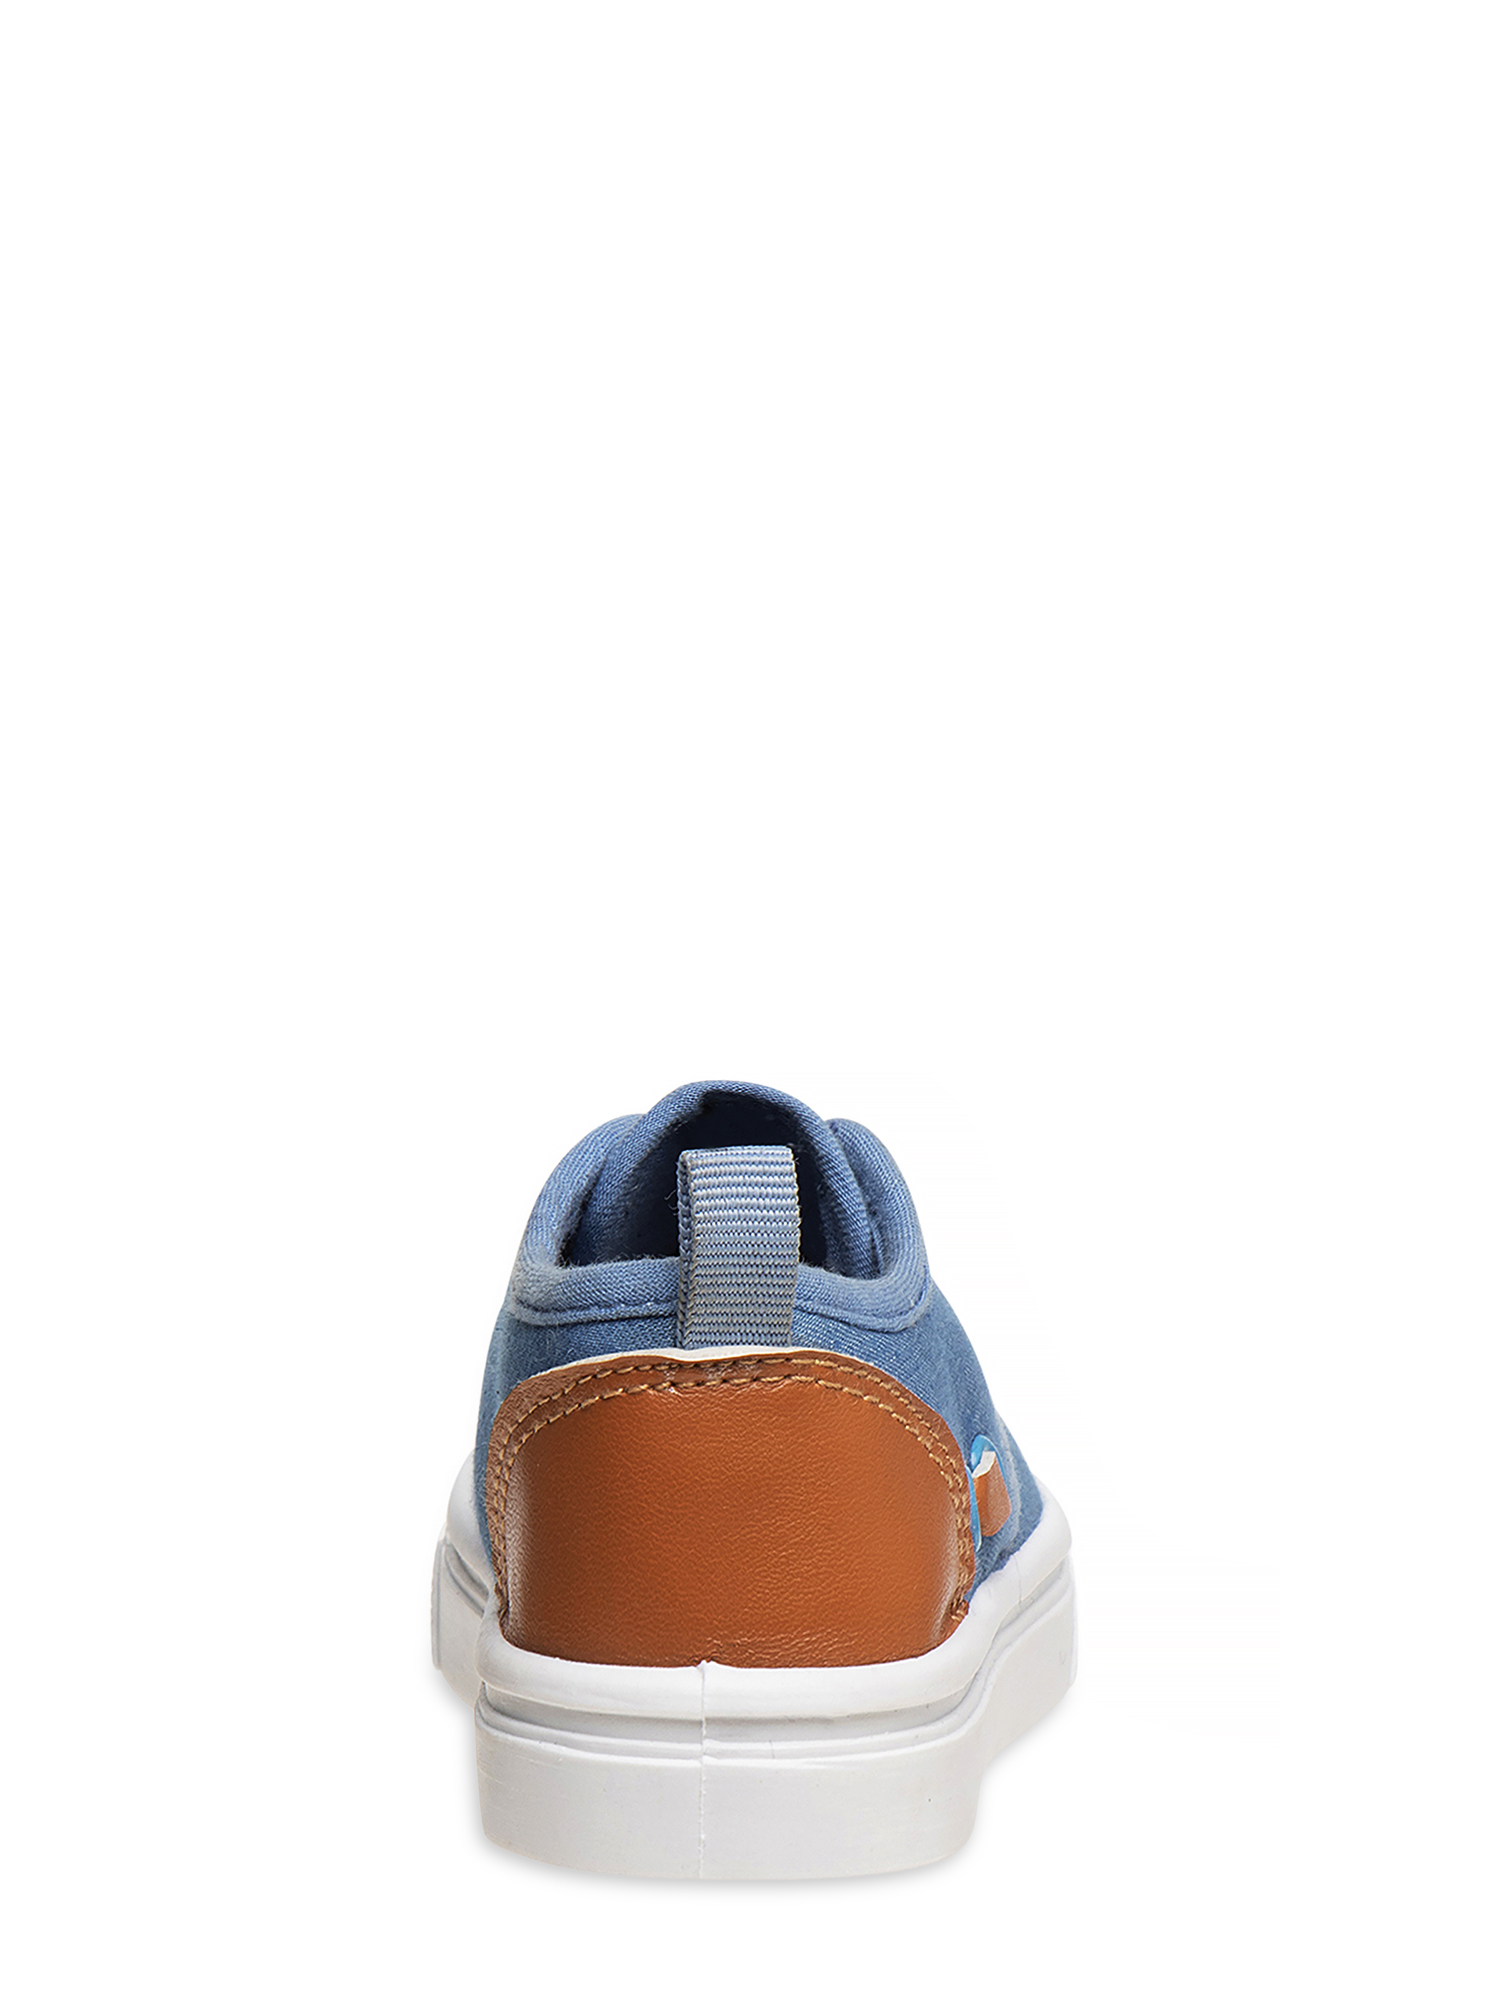 Beverly Hills Polo Club Toddler Boys Denim Colorblock Casual Sneakers - image 3 of 5